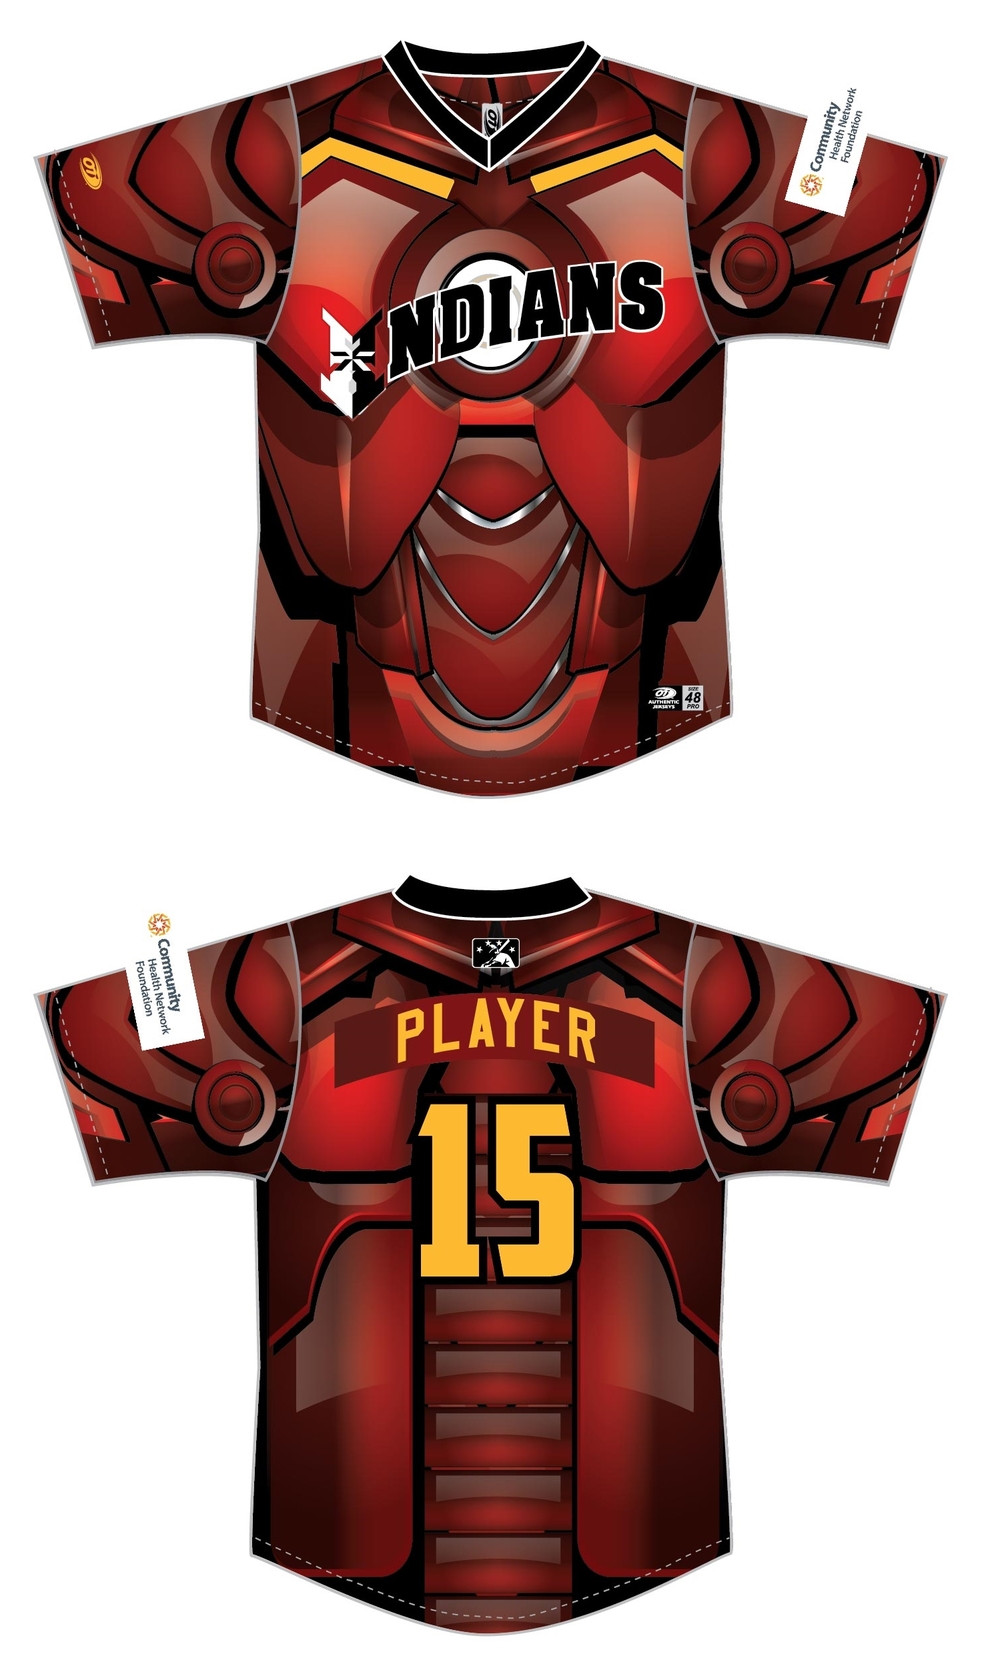 indianapolis indians jerseys